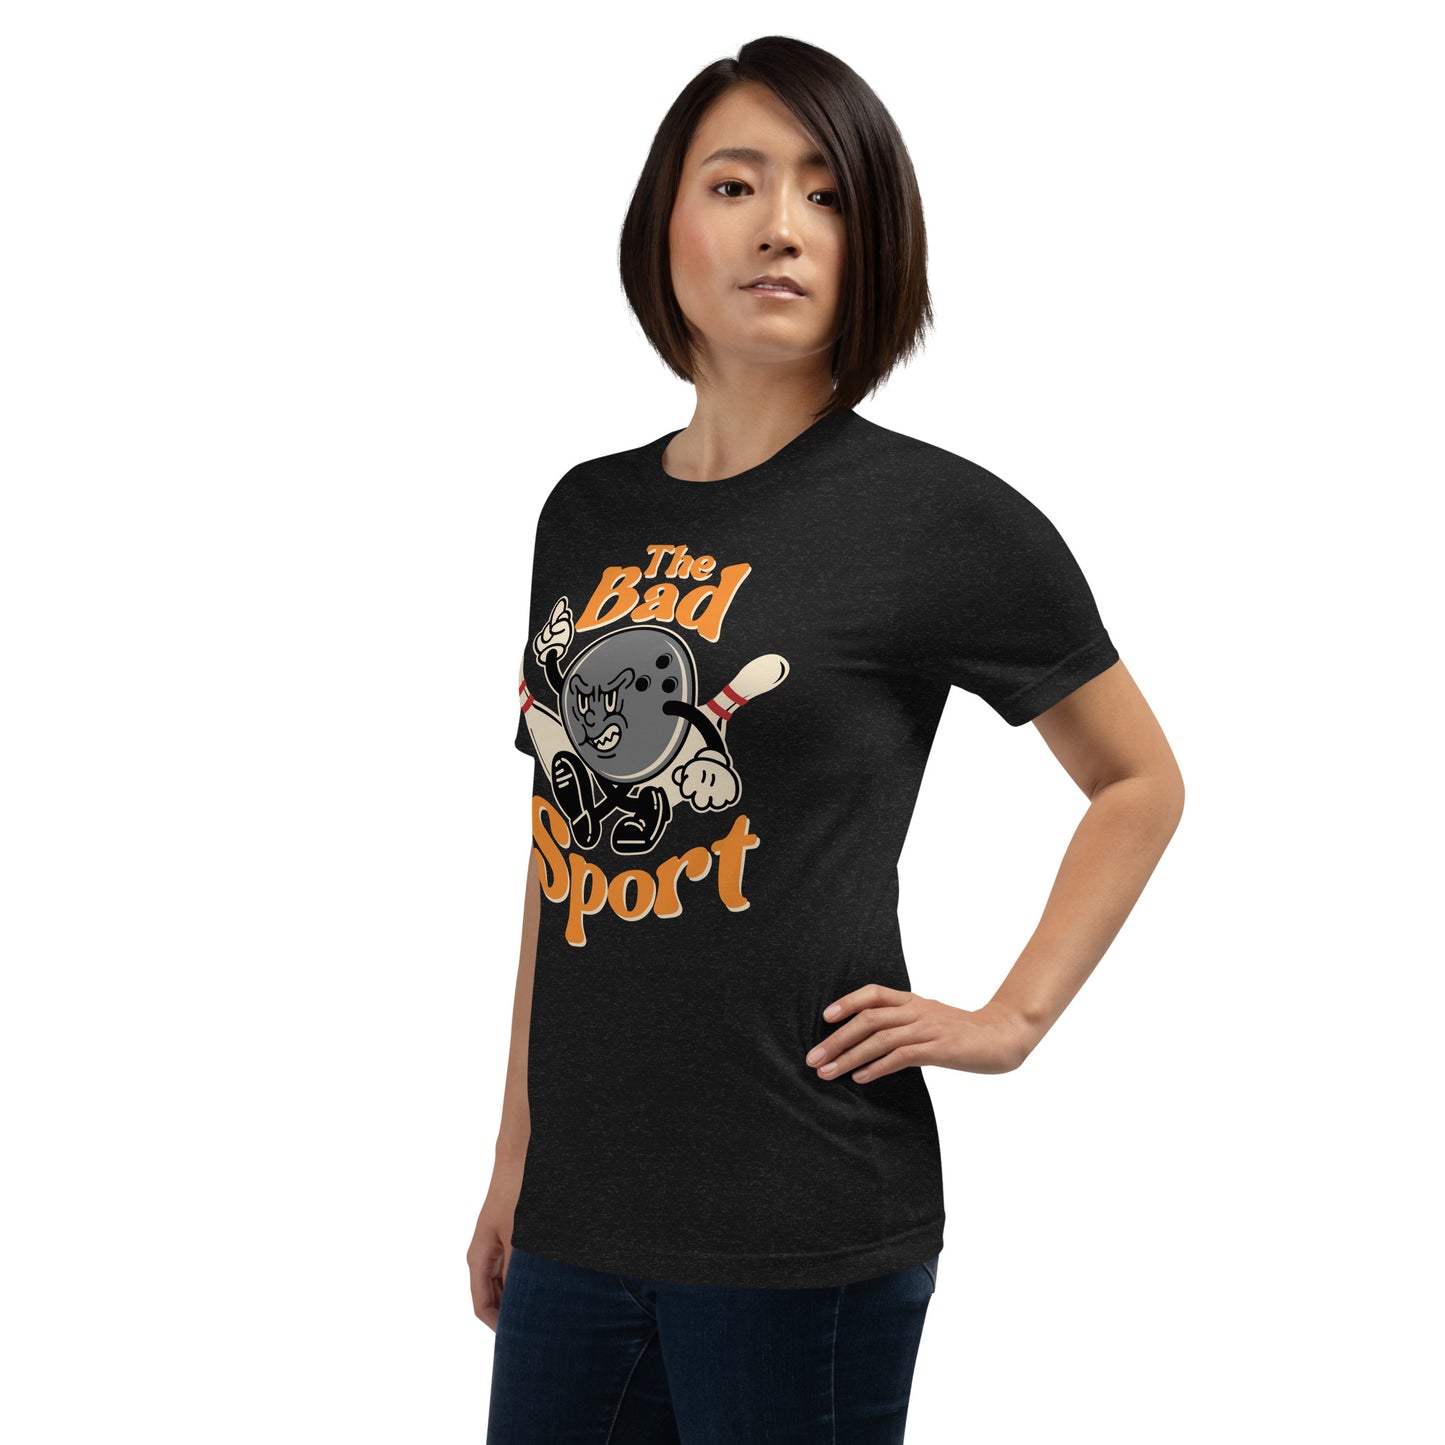 Bowling The Bad Sport Unisex Retail Fit T-Shirt